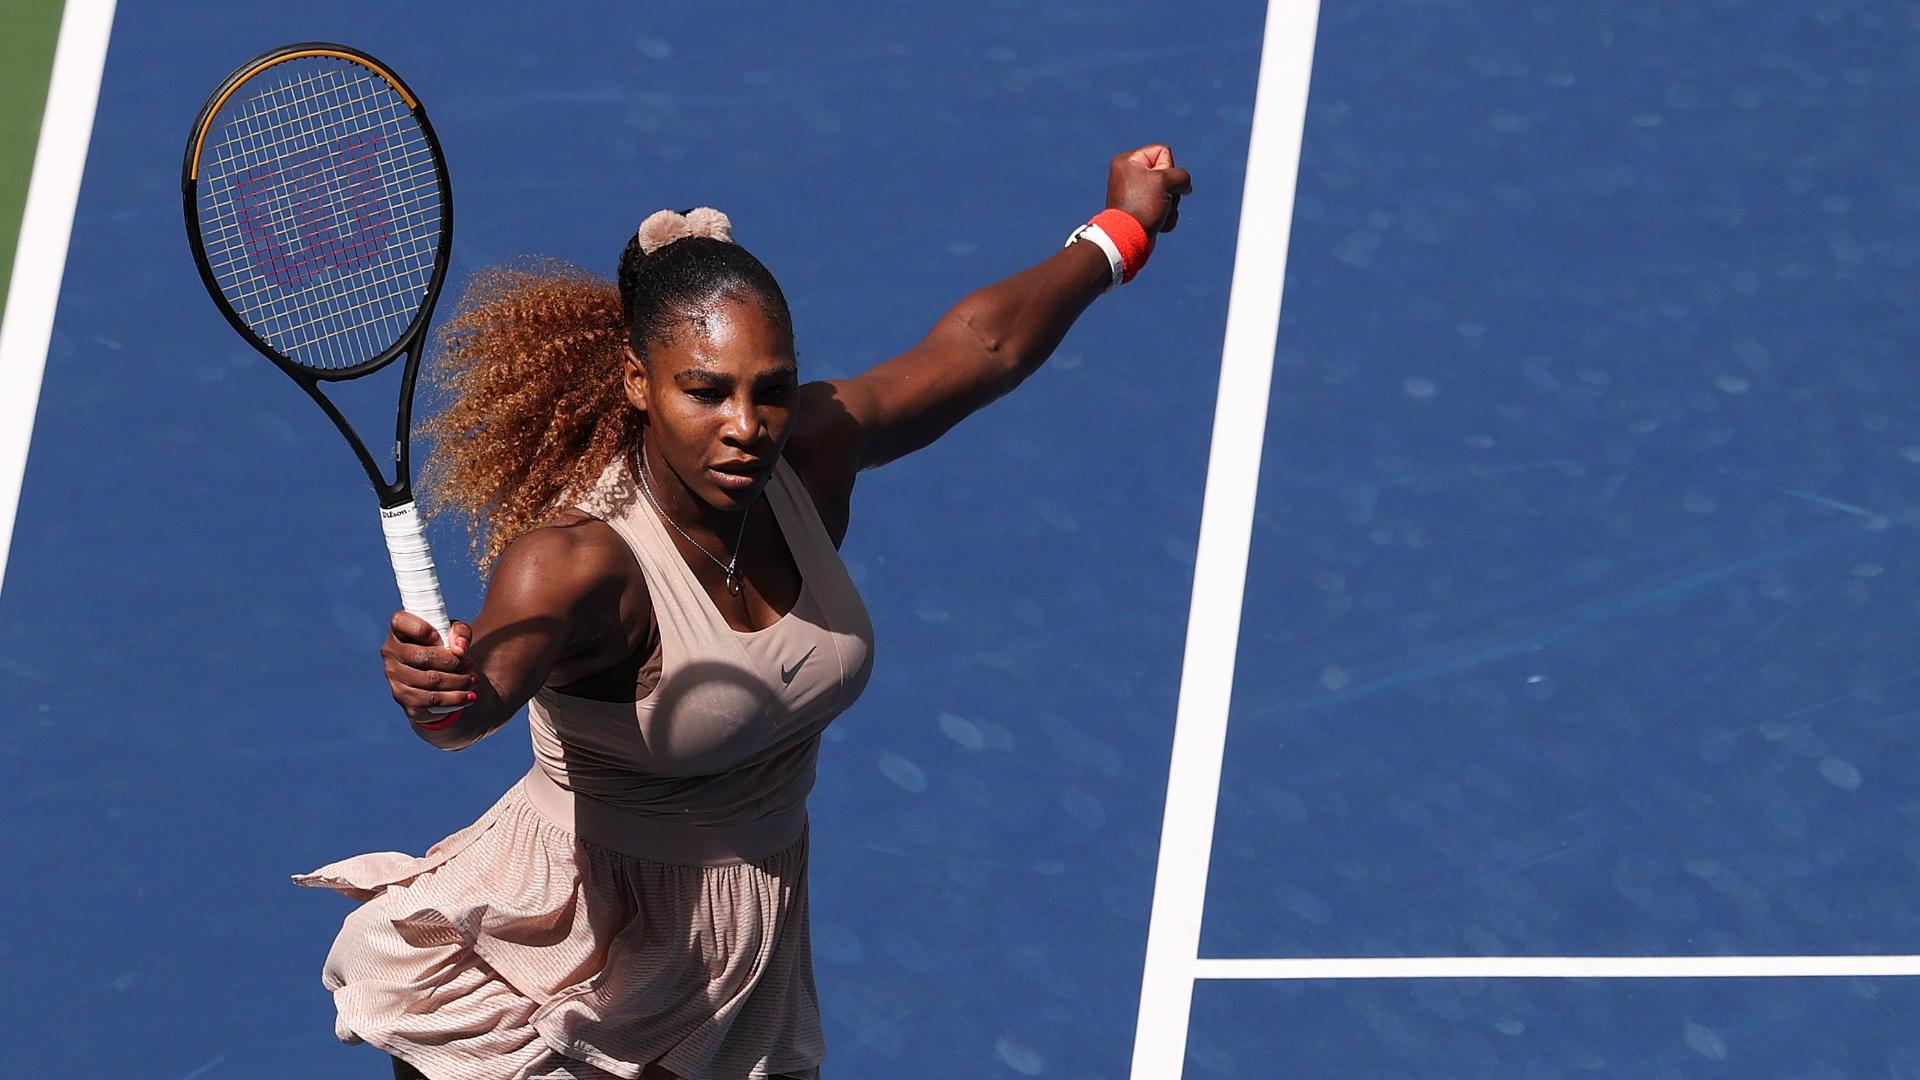 Serena is fired up after downing Sakkari for spot in quarterfinals